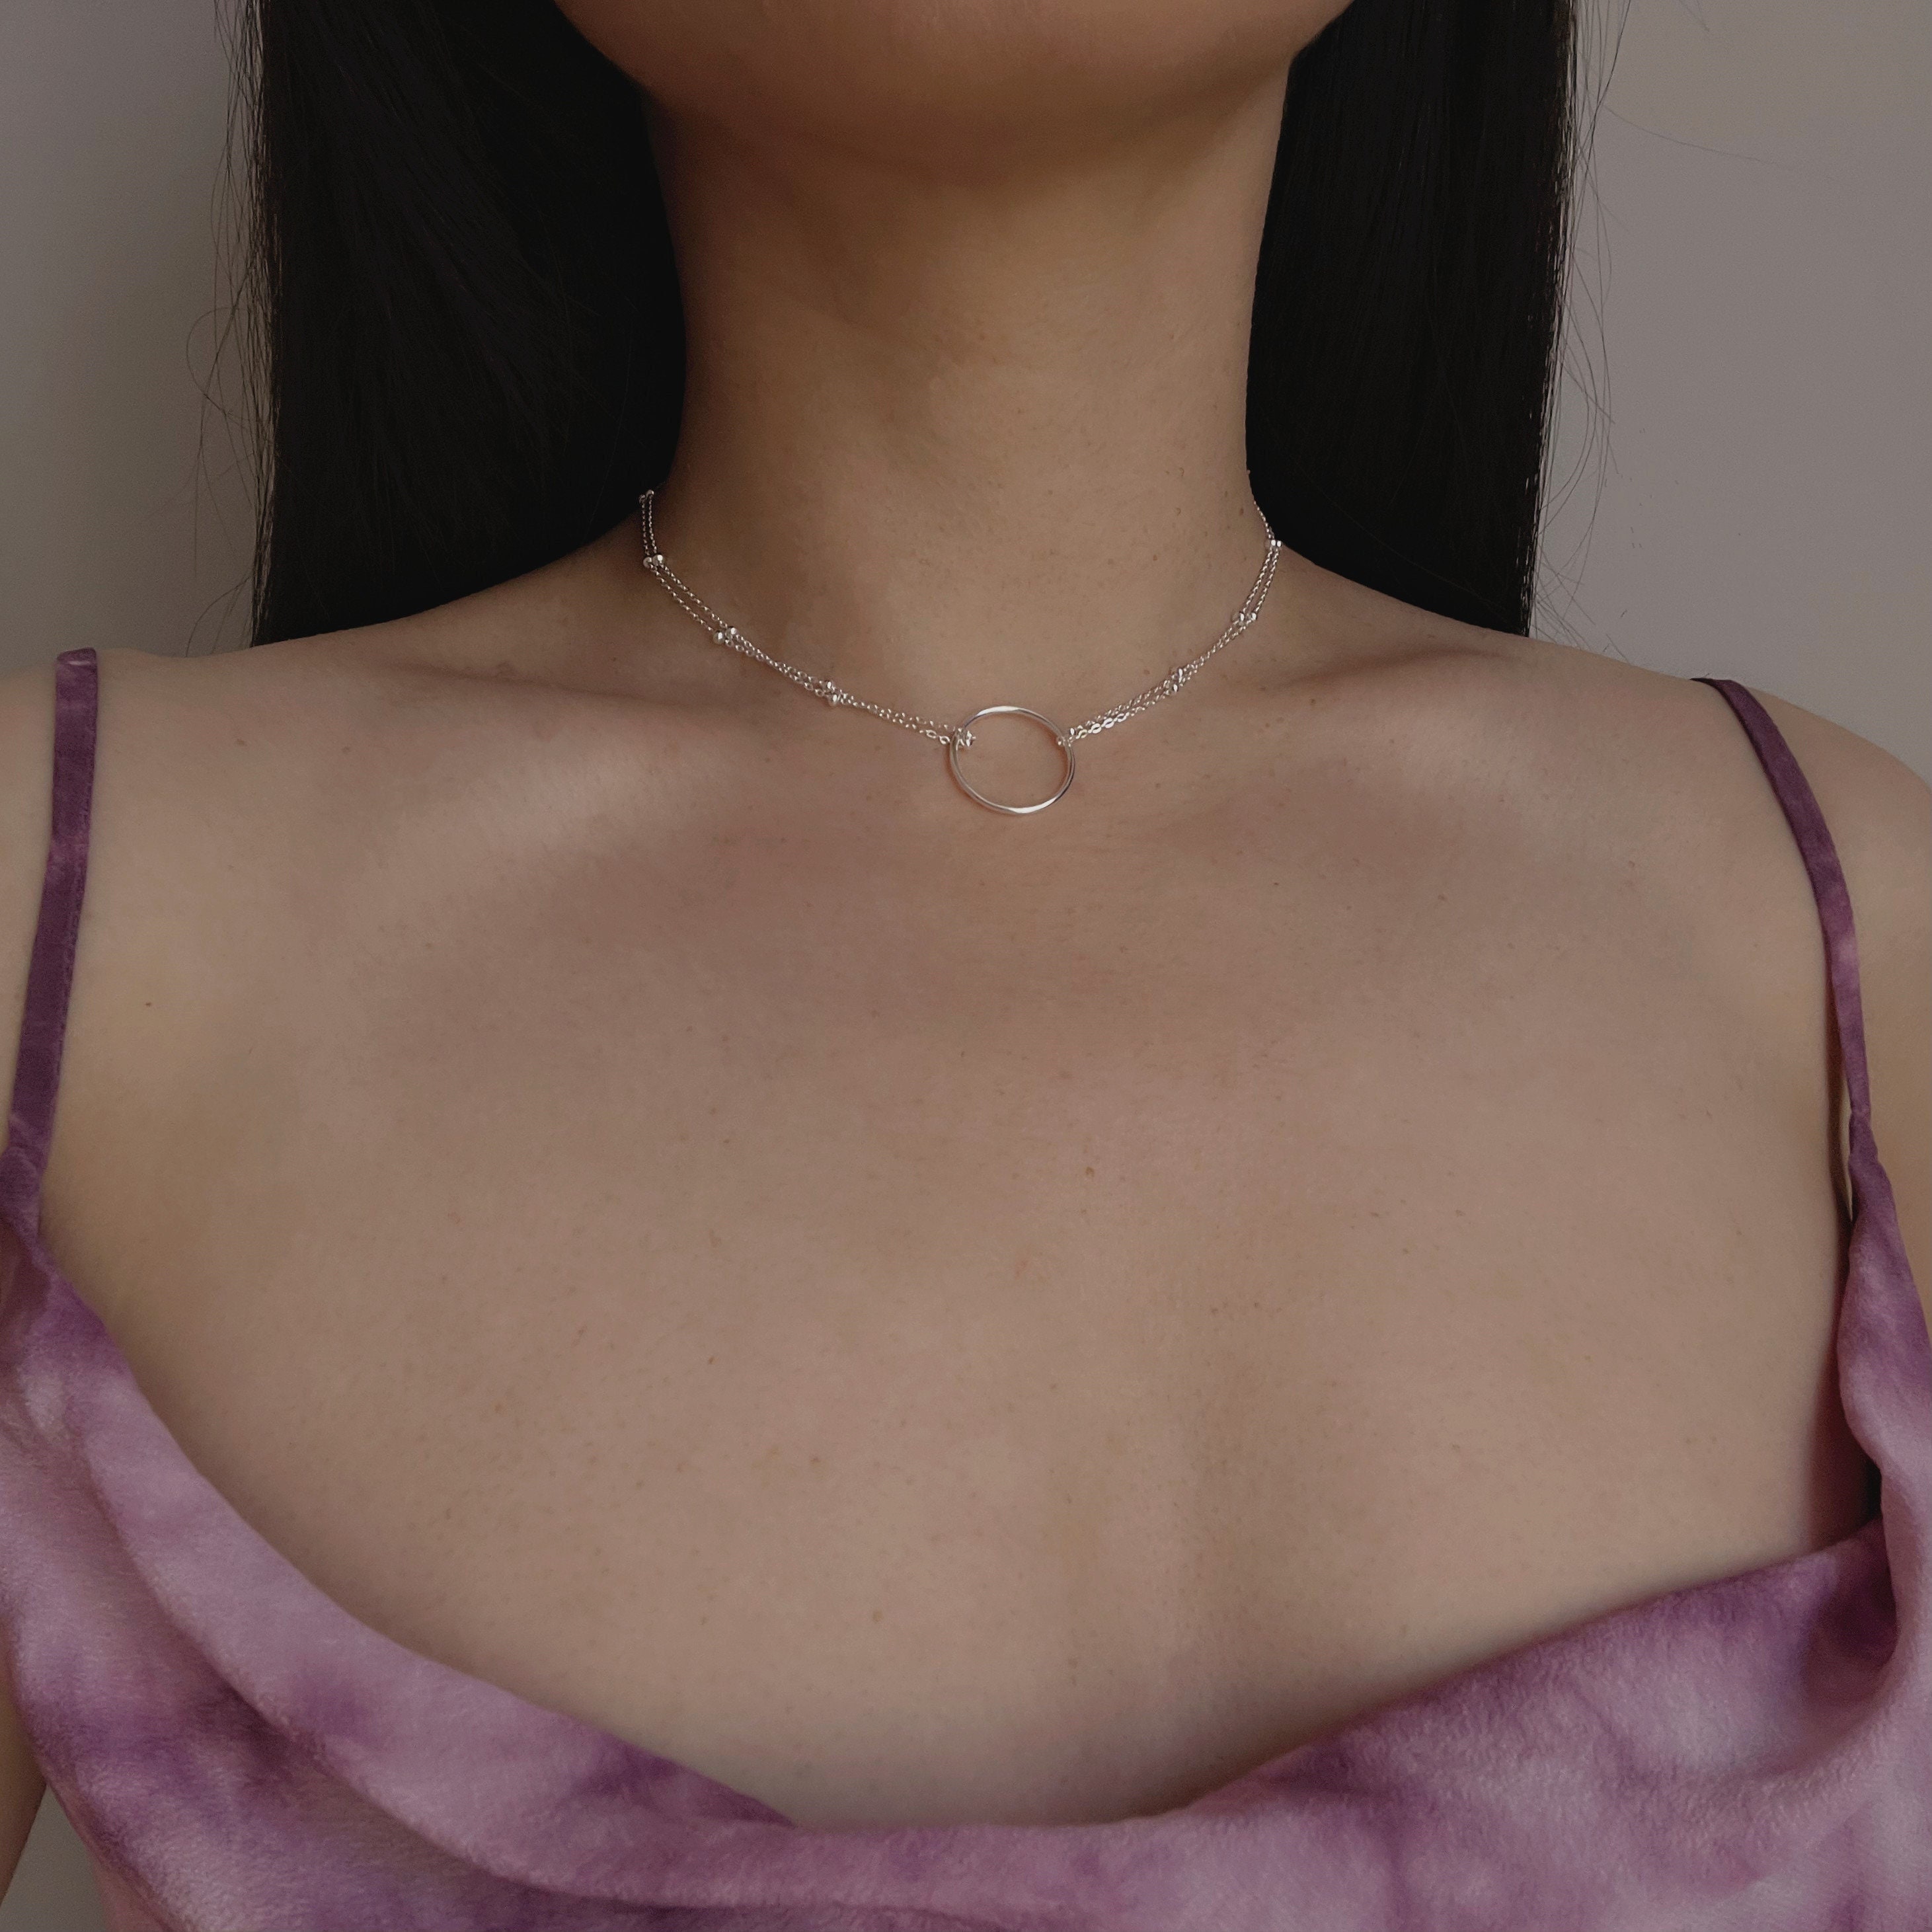 3 Ways to Choose a Choker Necklace - wikiHow